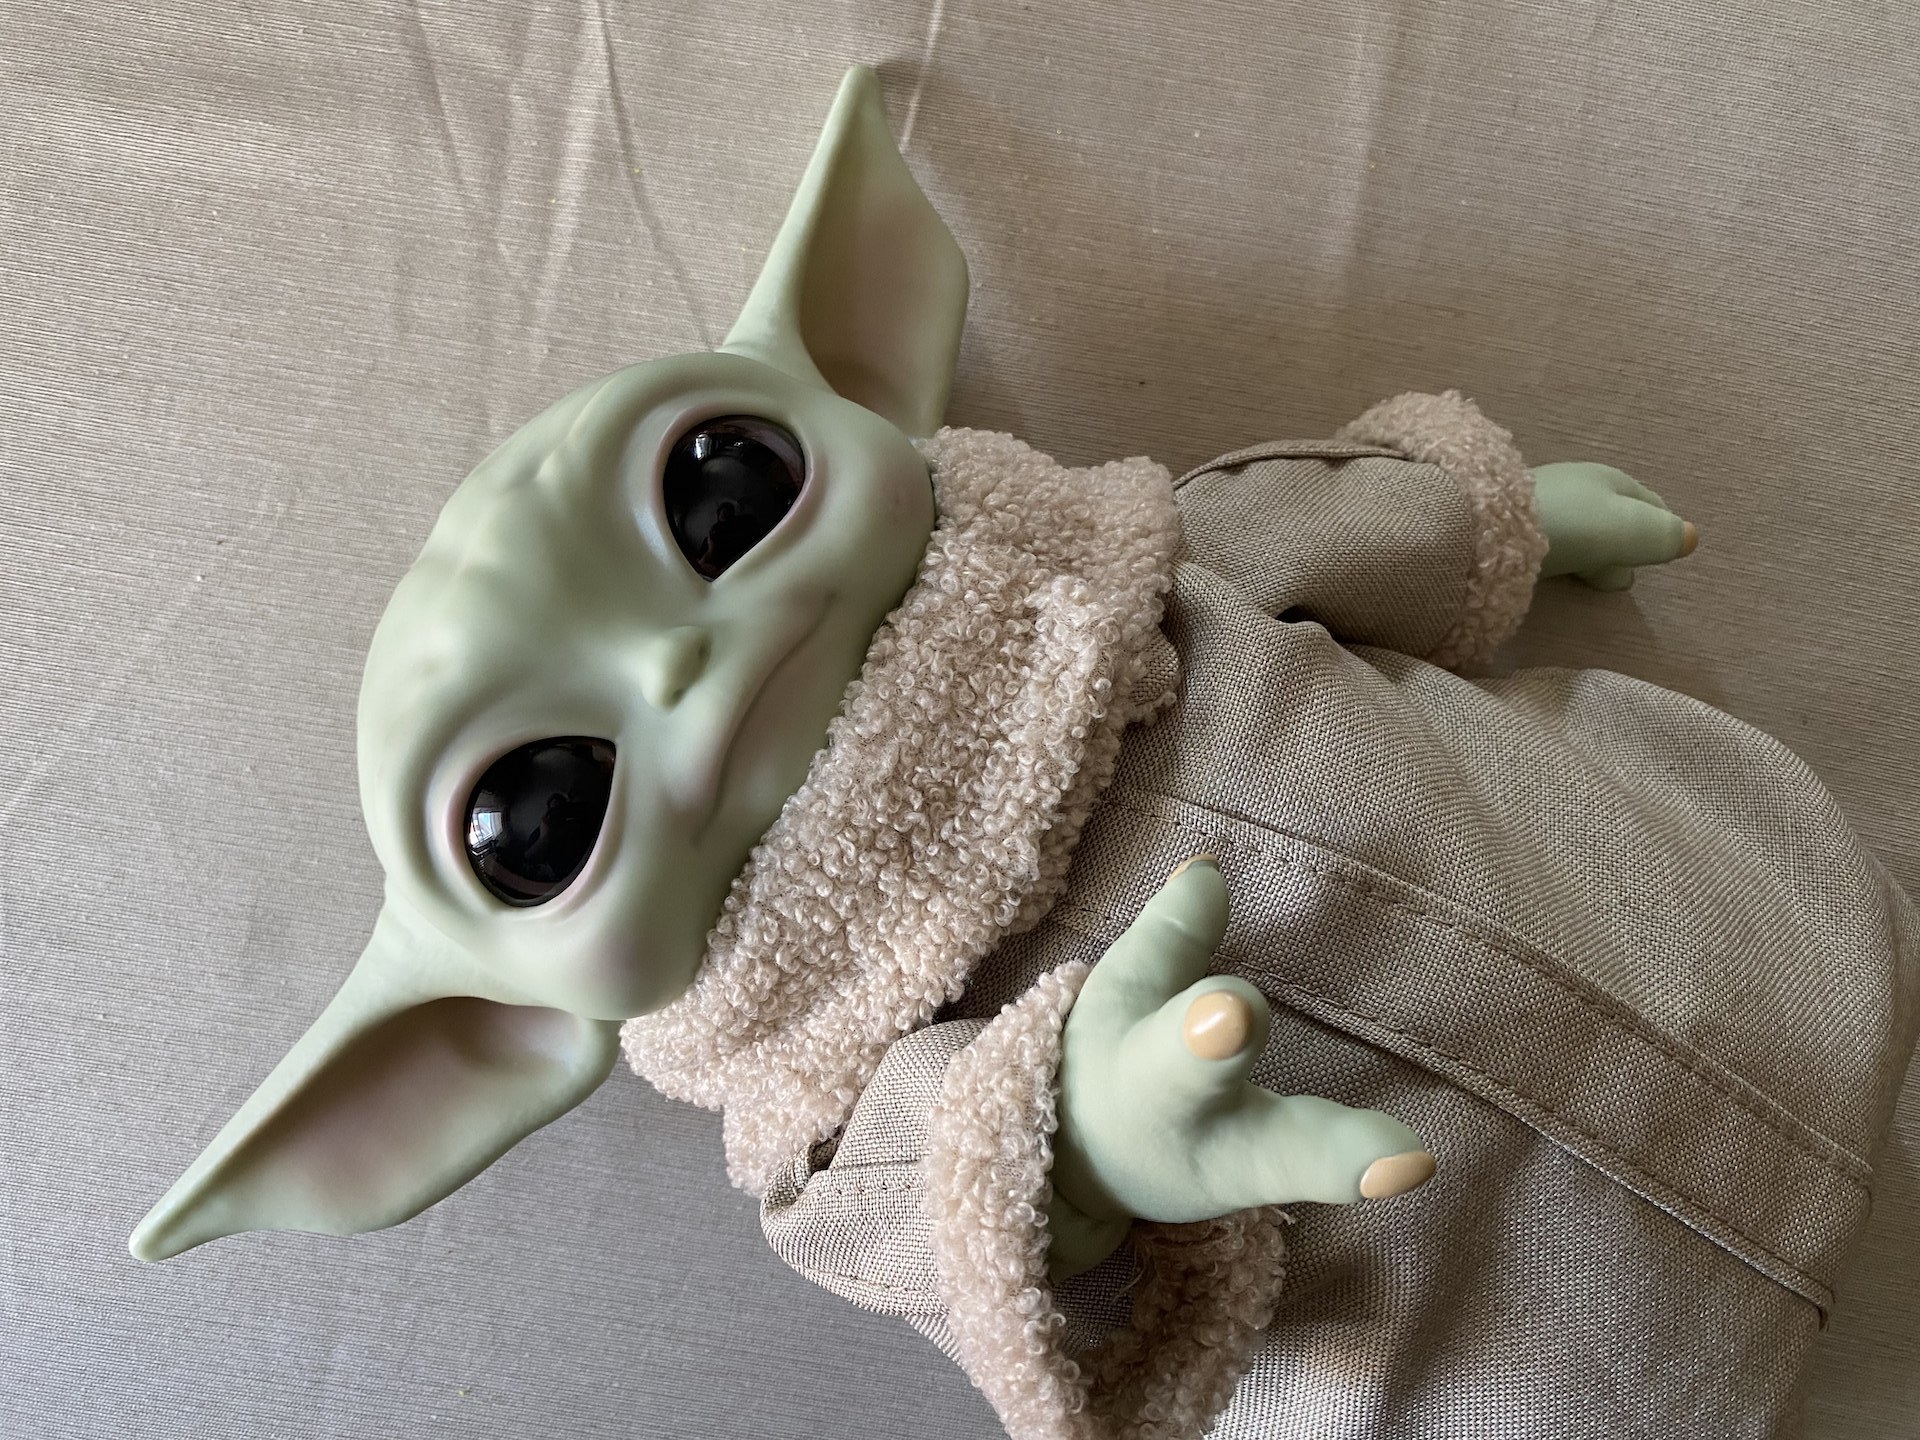 This official Baby Yoda 11-inch plush toy is adorable